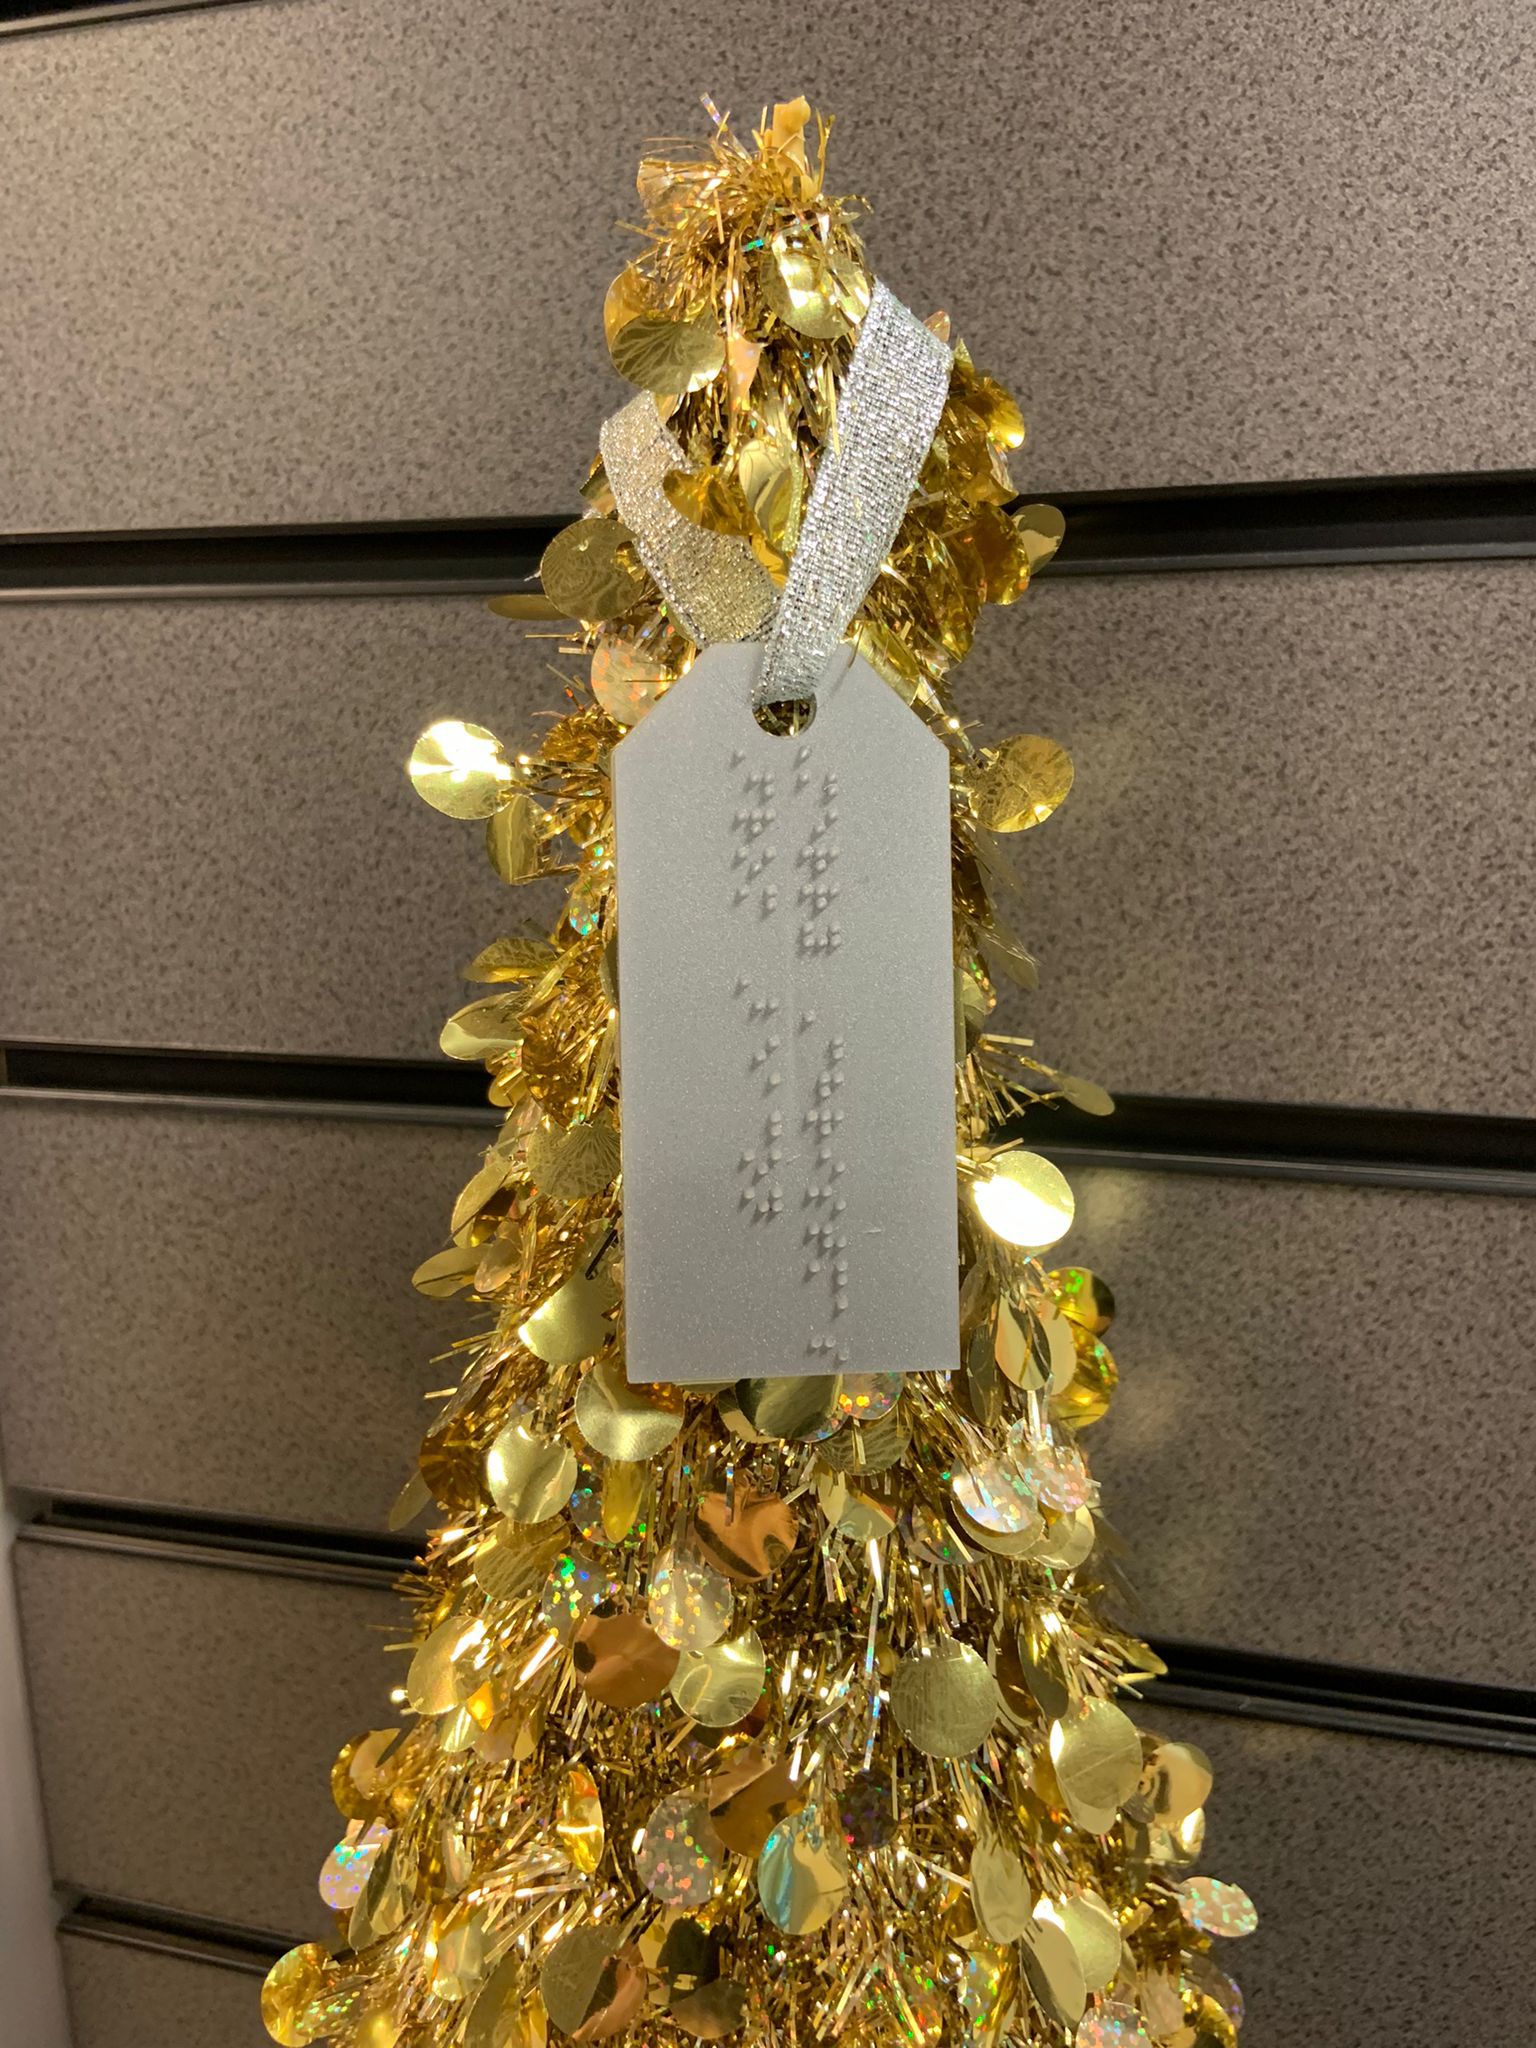 This shows a golden tree with a silver gift tag on which reads Merry Christmas from Kathy